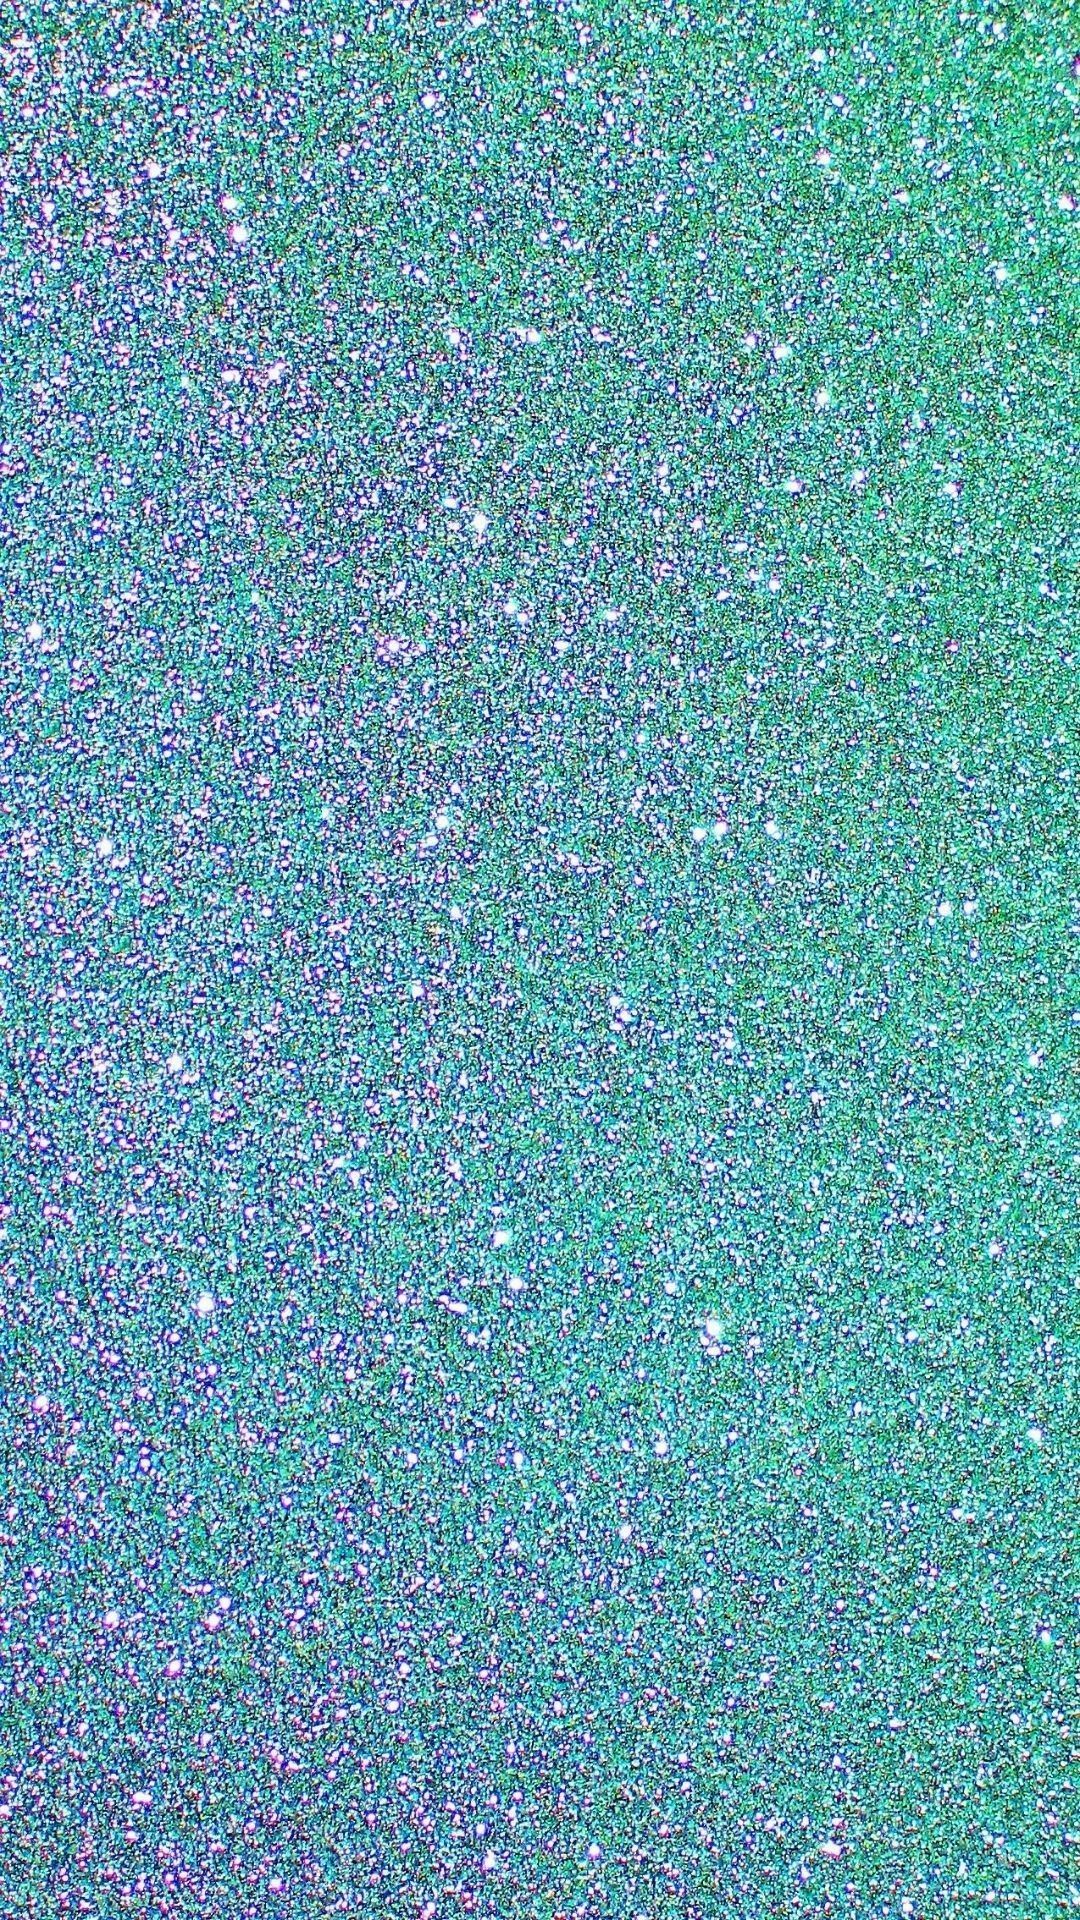 Teal Glitter iPhone Wallpapers on